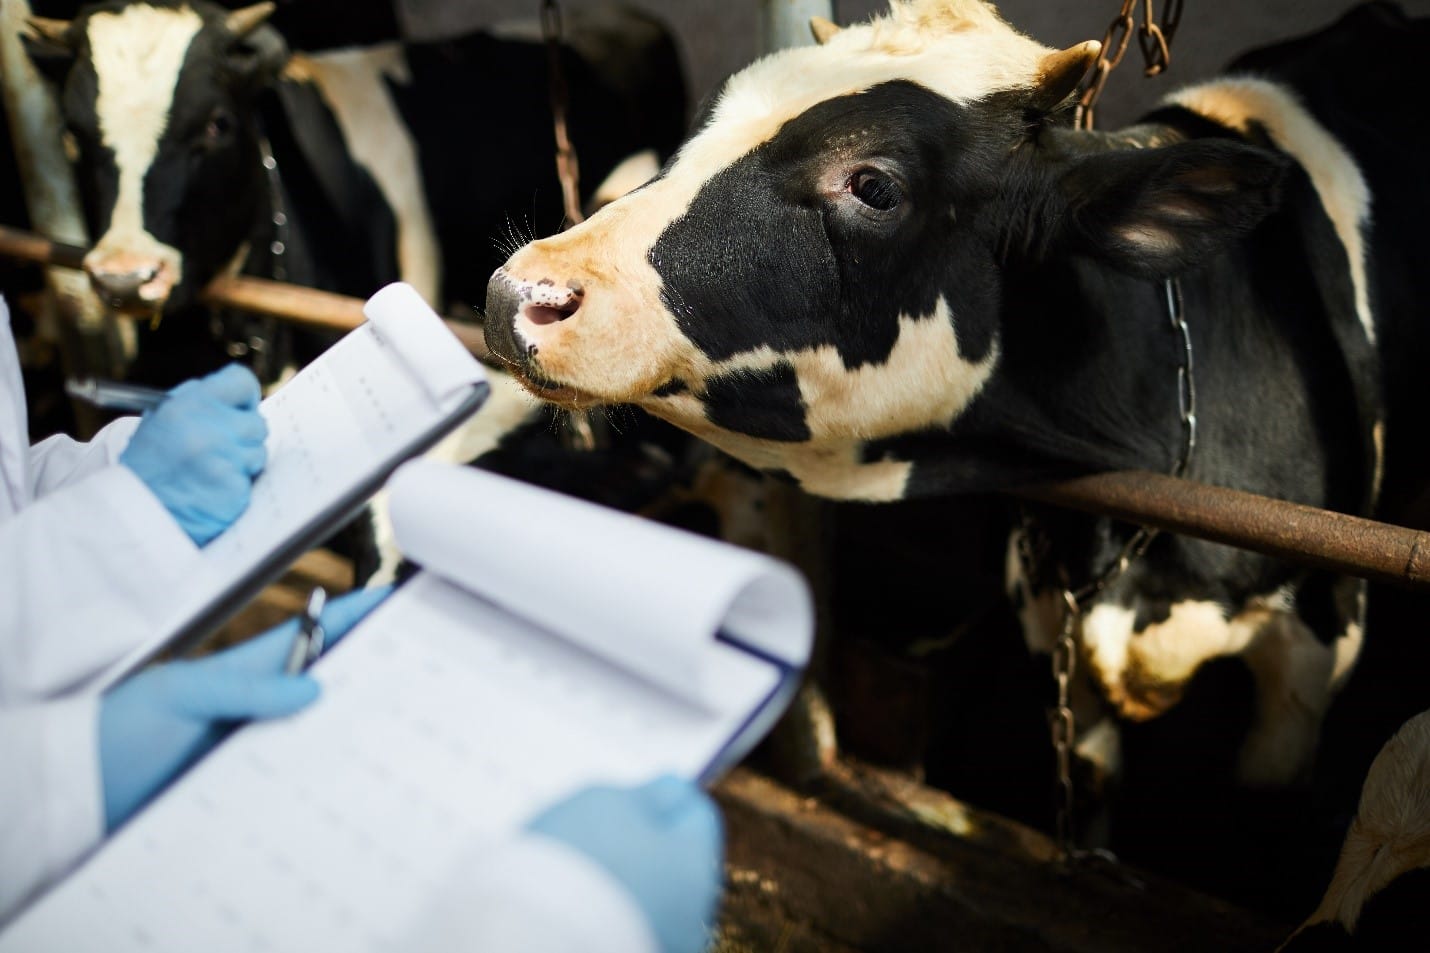 Don’t Let the Farm Bug Bite: Tips on how to Implement Biosecurity on Your Farm